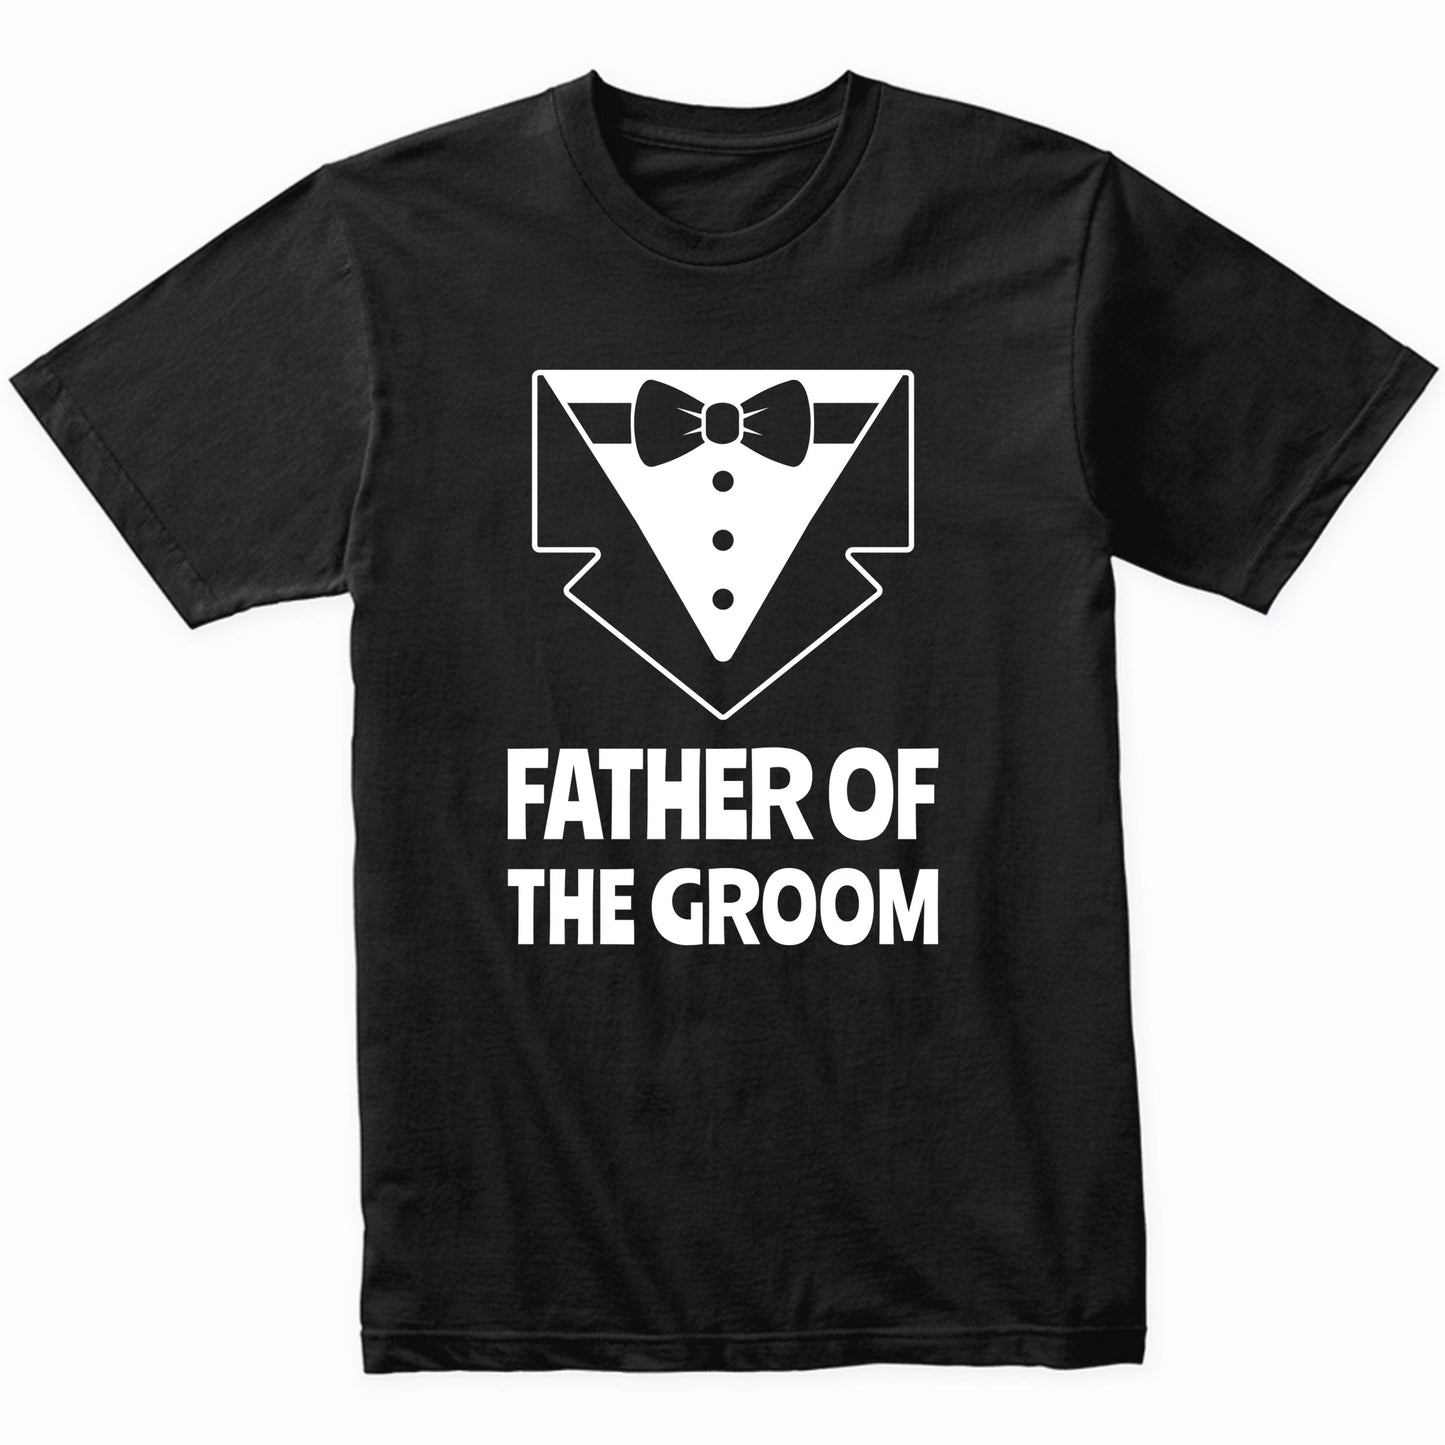 Father Of The Groom Shirt Wedding Party Shirt